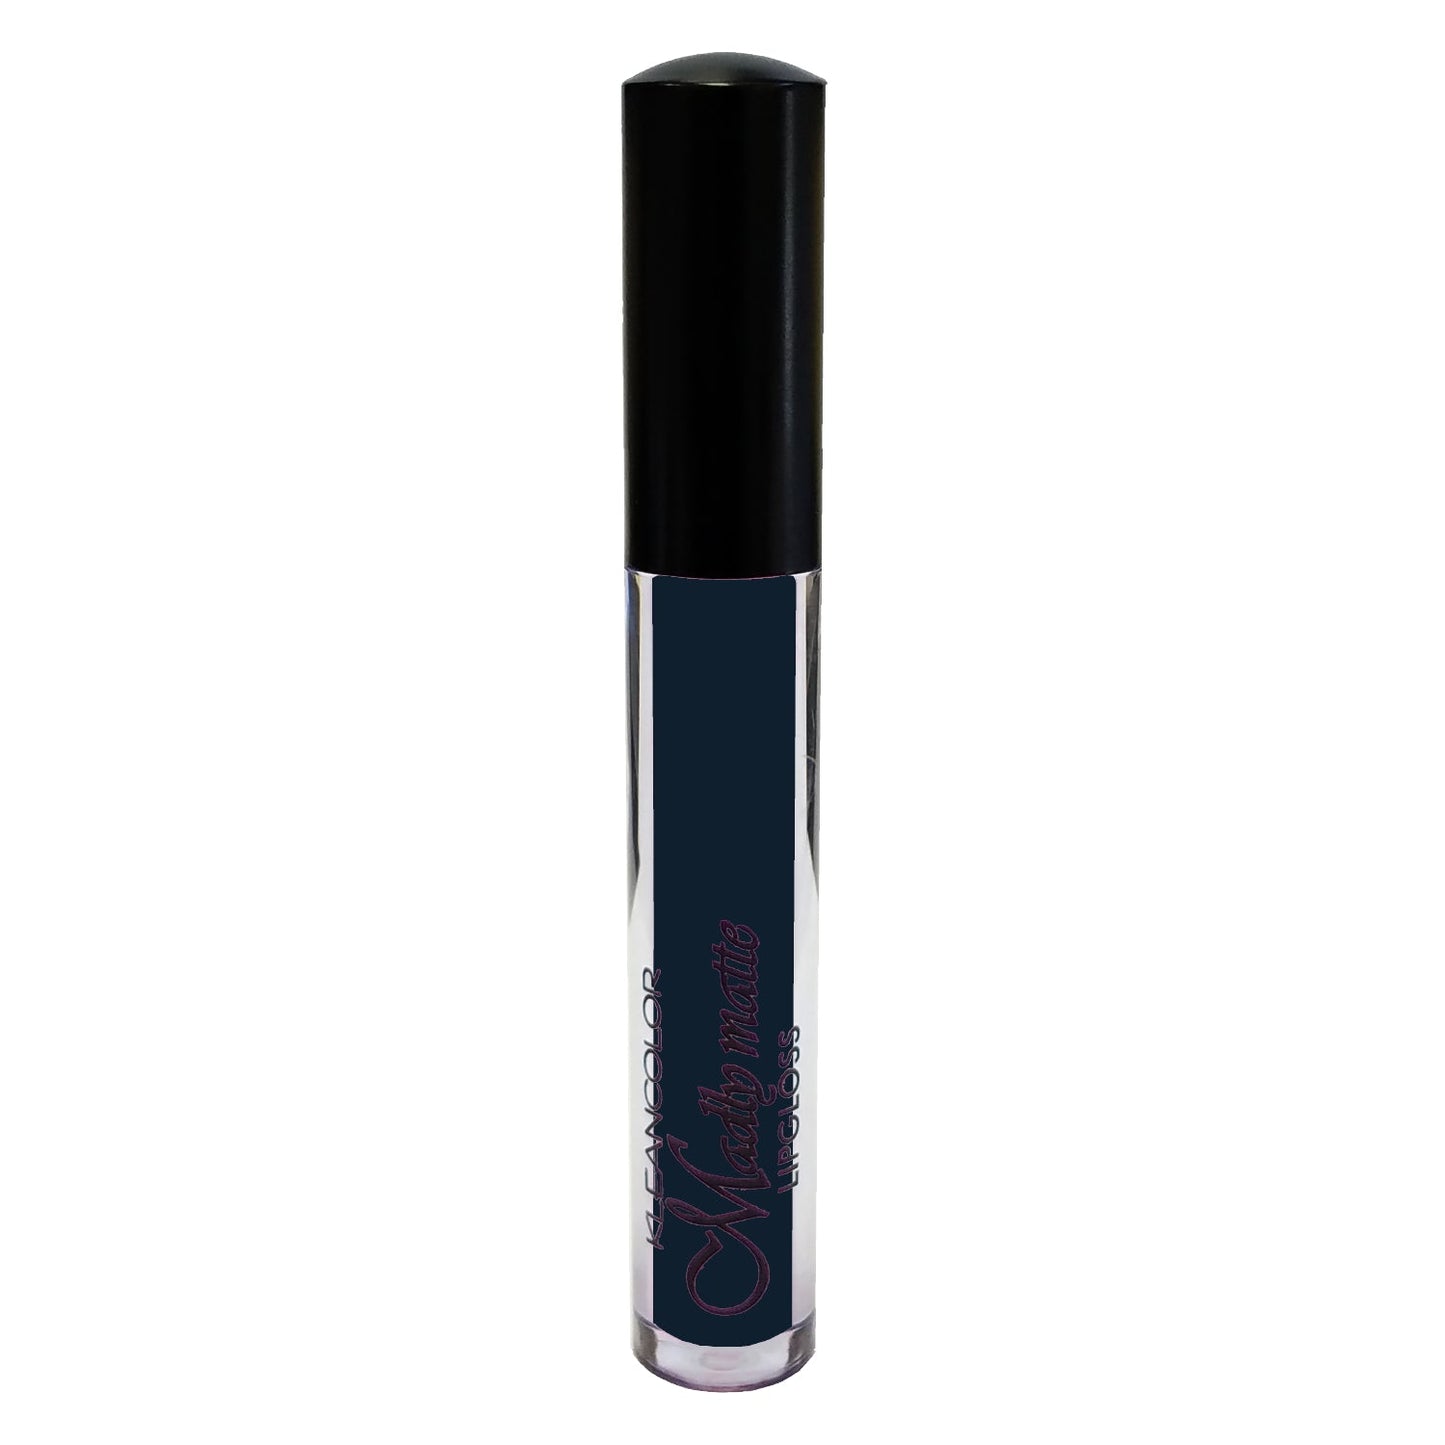 KLEANCOLOR Madly Matte Lip Gloss